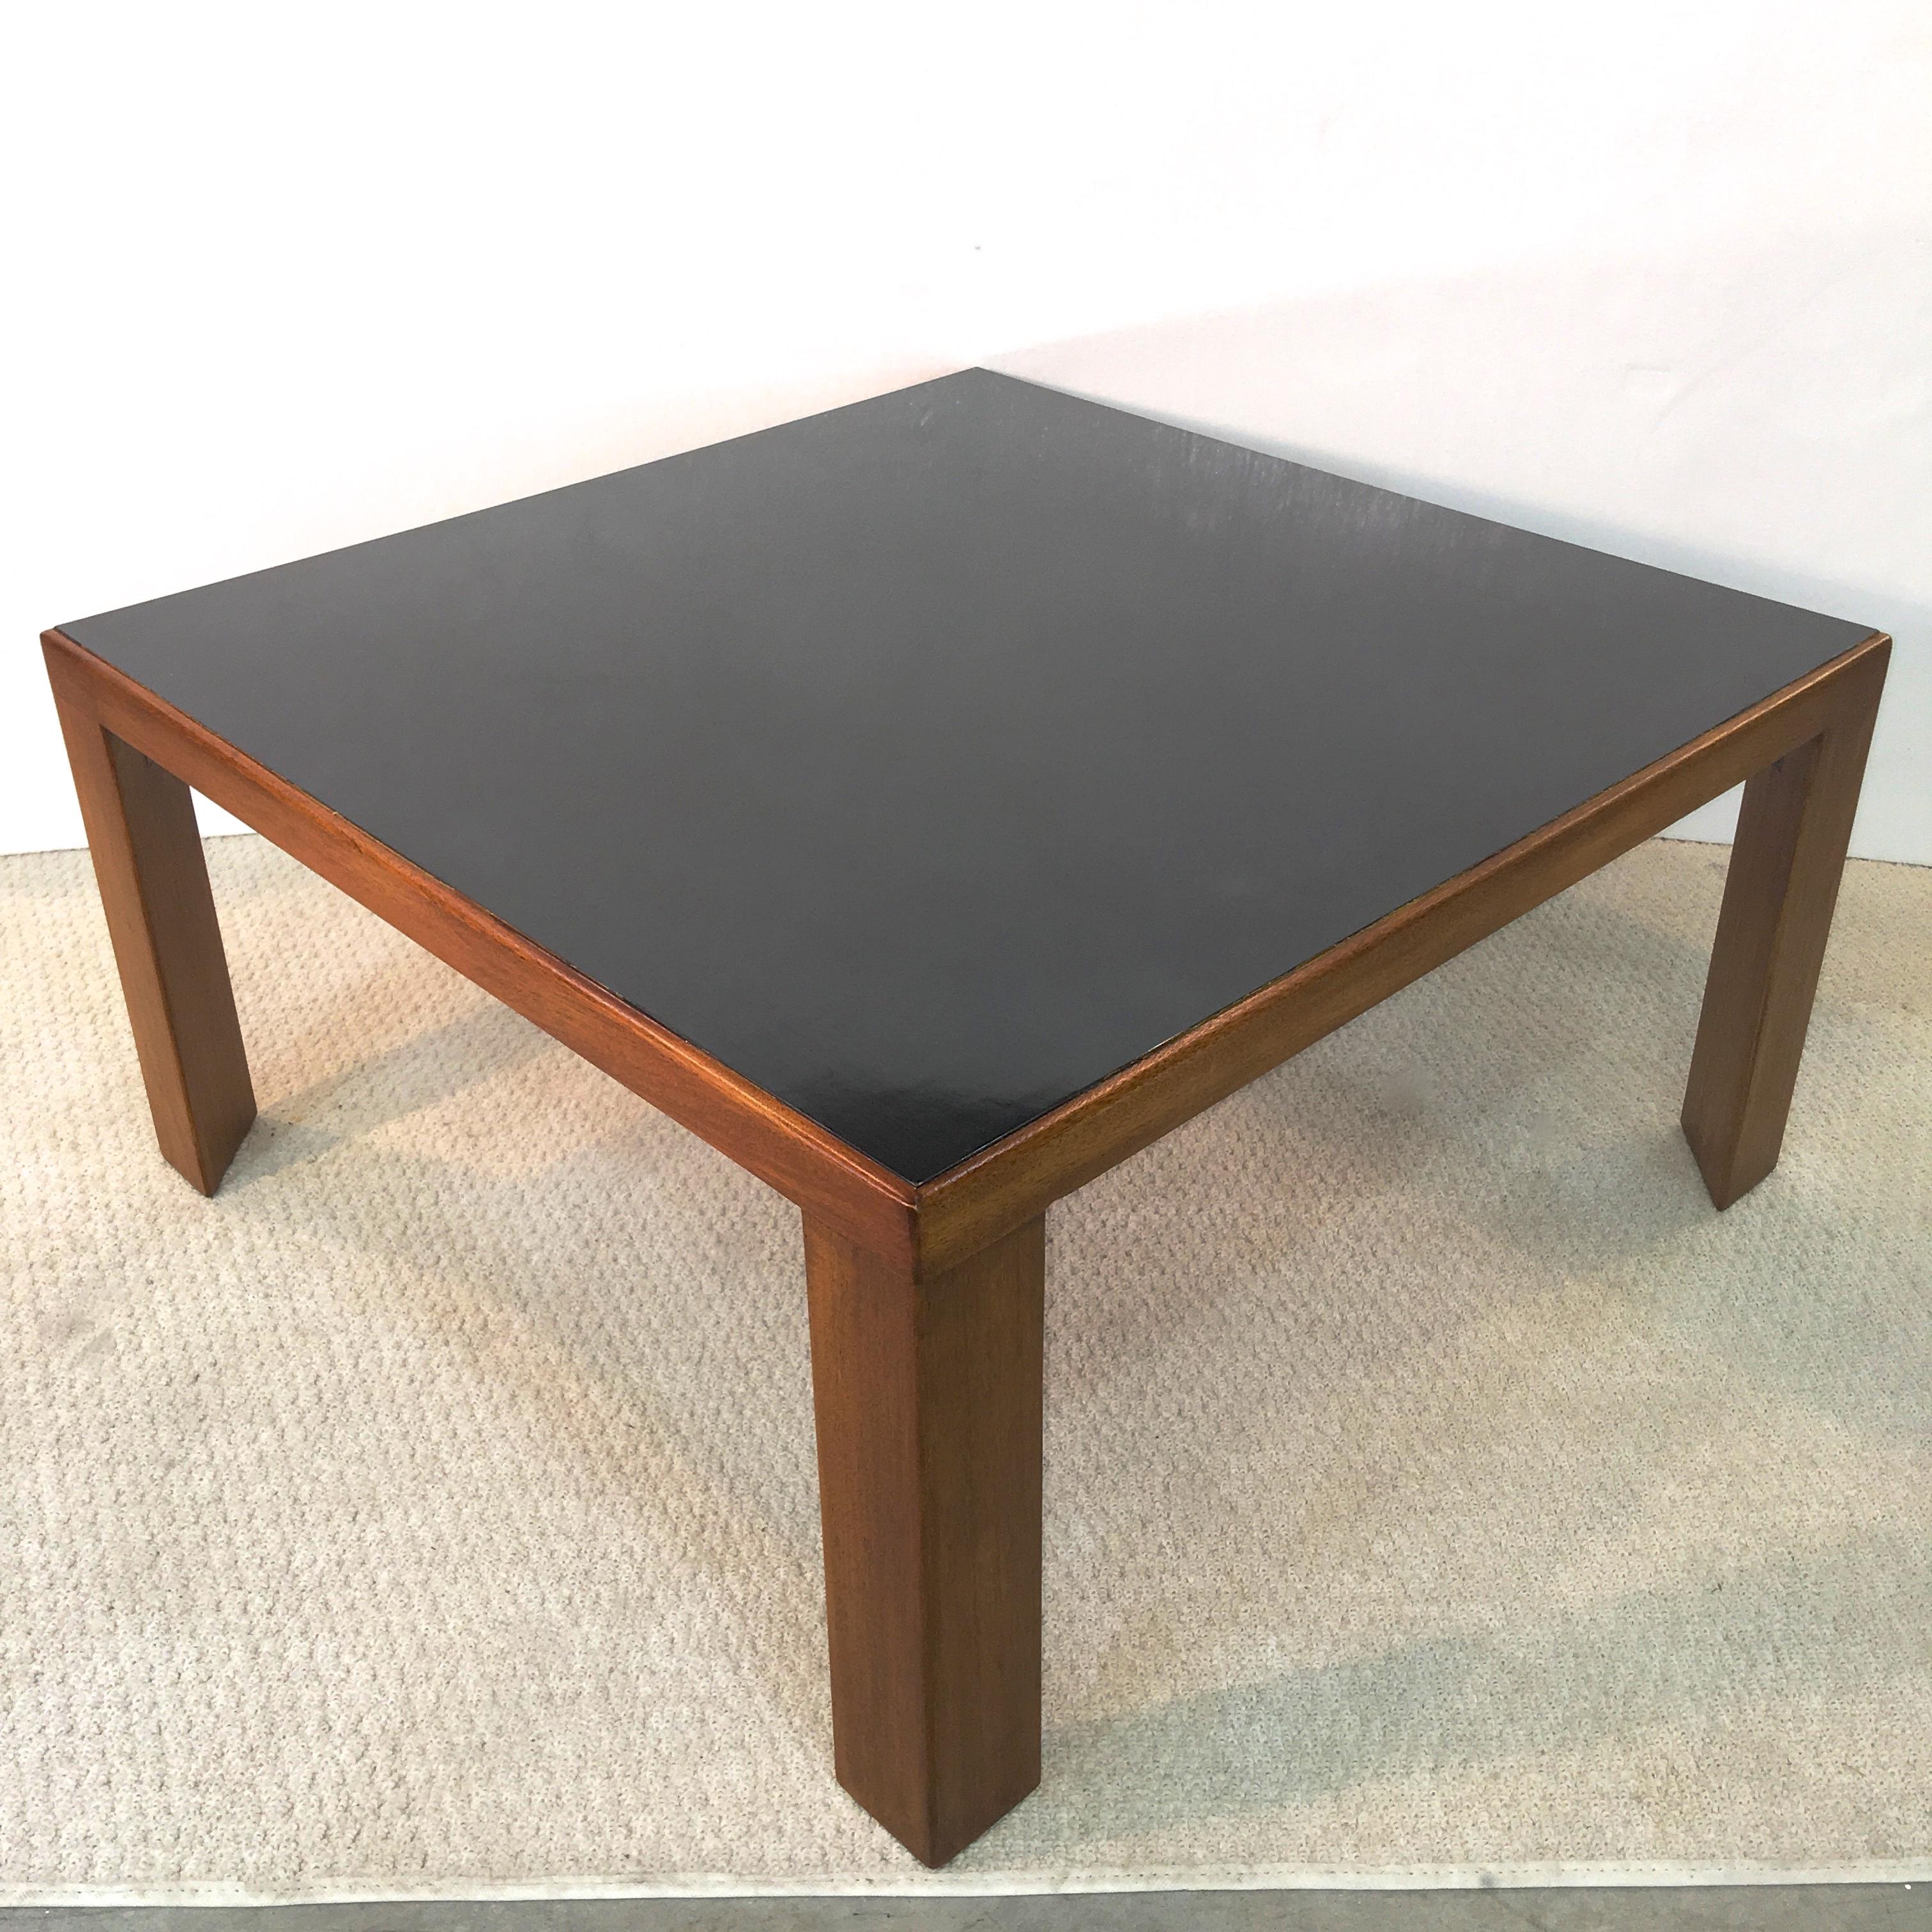 Late 1950s Edward Wormley for Dunbar model number 3374 square walnut cocktail table with distinctive three-sided legs and black micarta top. Understated elegance. Marked Dunbar on underside.